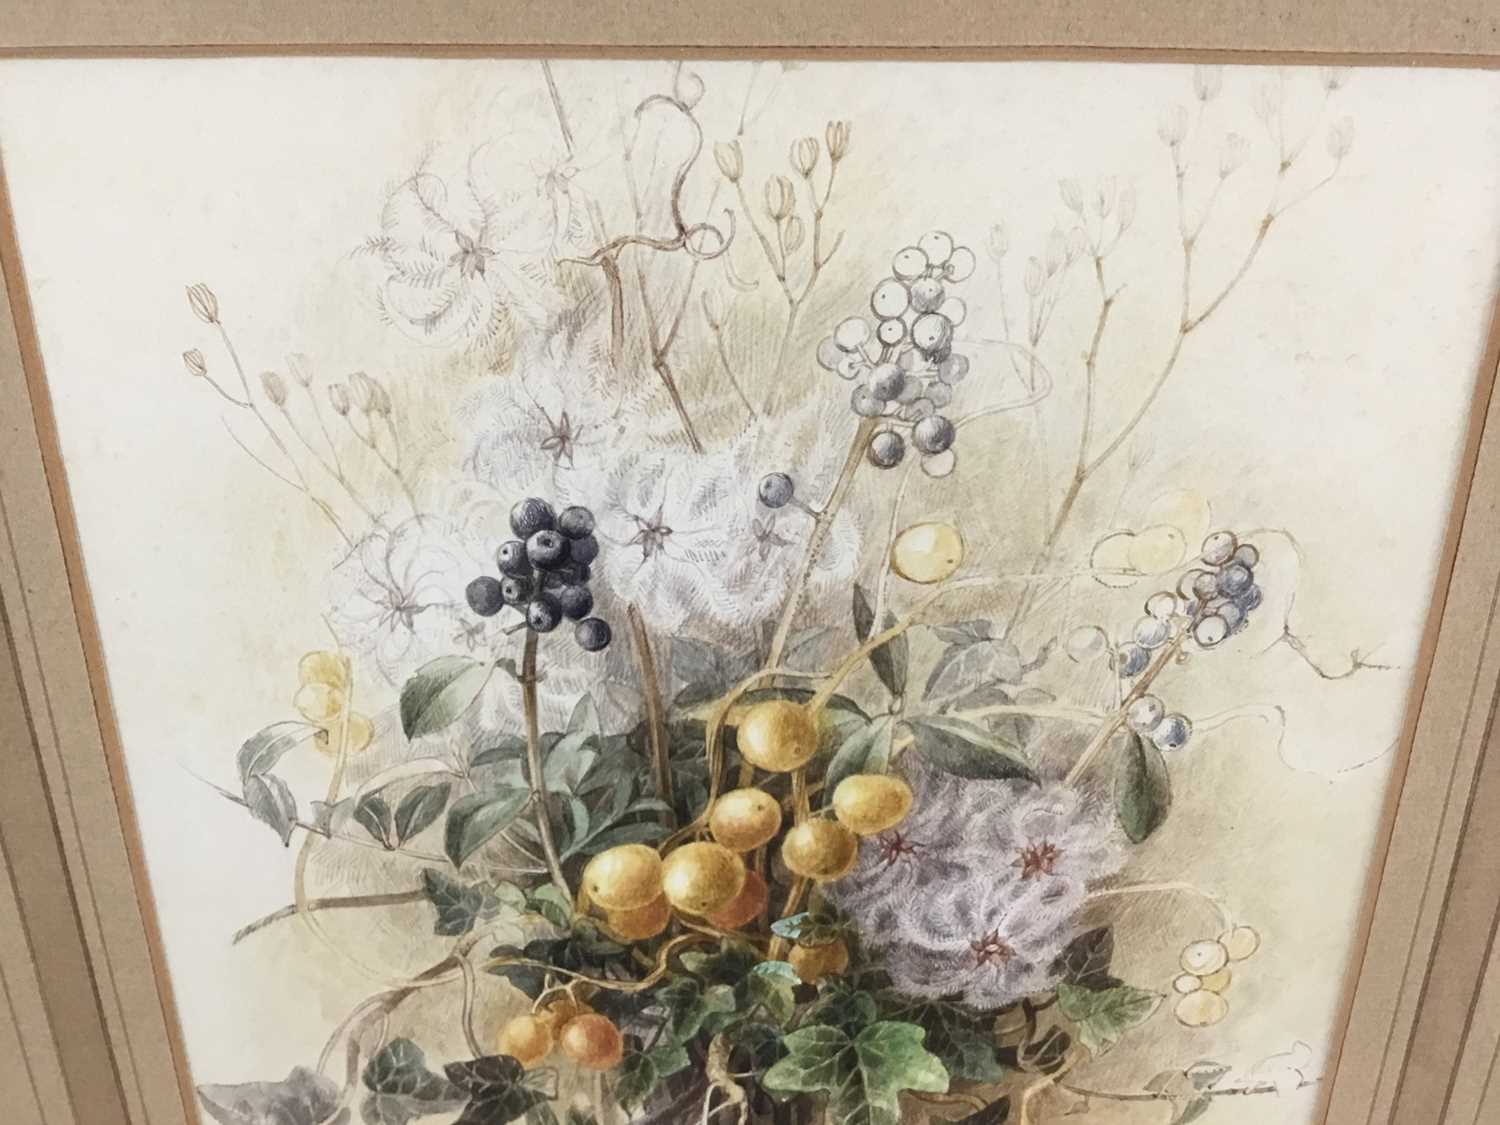 Claire Dalby, contemporary, watercolour - still life, signed, in glazed frame - Image 3 of 6